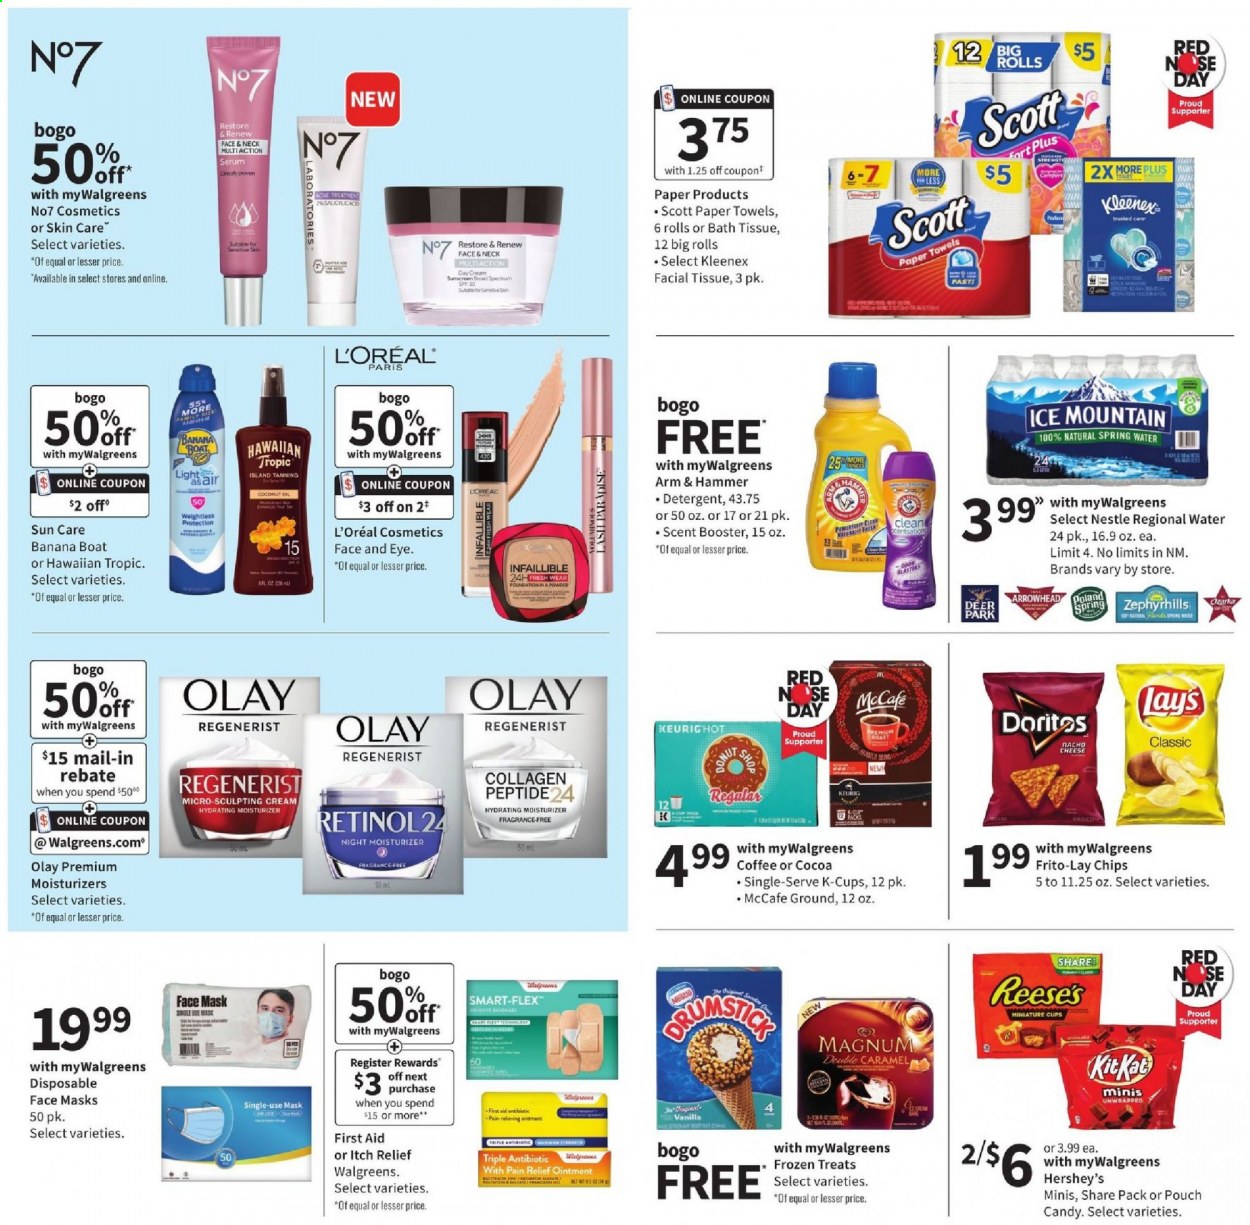 thumbnail - Walgreens Flyer - 05/16/2021 - 05/22/2021 - Sales products - Scott, cheese, Magnum, Reese's, Hershey's, Nestlé, Doritos, Lay’s, Frito-Lay, ARM & HAMMER, spring water, Ice Mountain, coffee, coffee capsules, McCafe, K-Cups, ointment, bath tissue, Kleenex, kitchen towels, paper towels, detergent, coconut oil, day cream, L’Oréal, moisturizer, serum, Olay, face mask, fragrance, pain relief. Page 3.